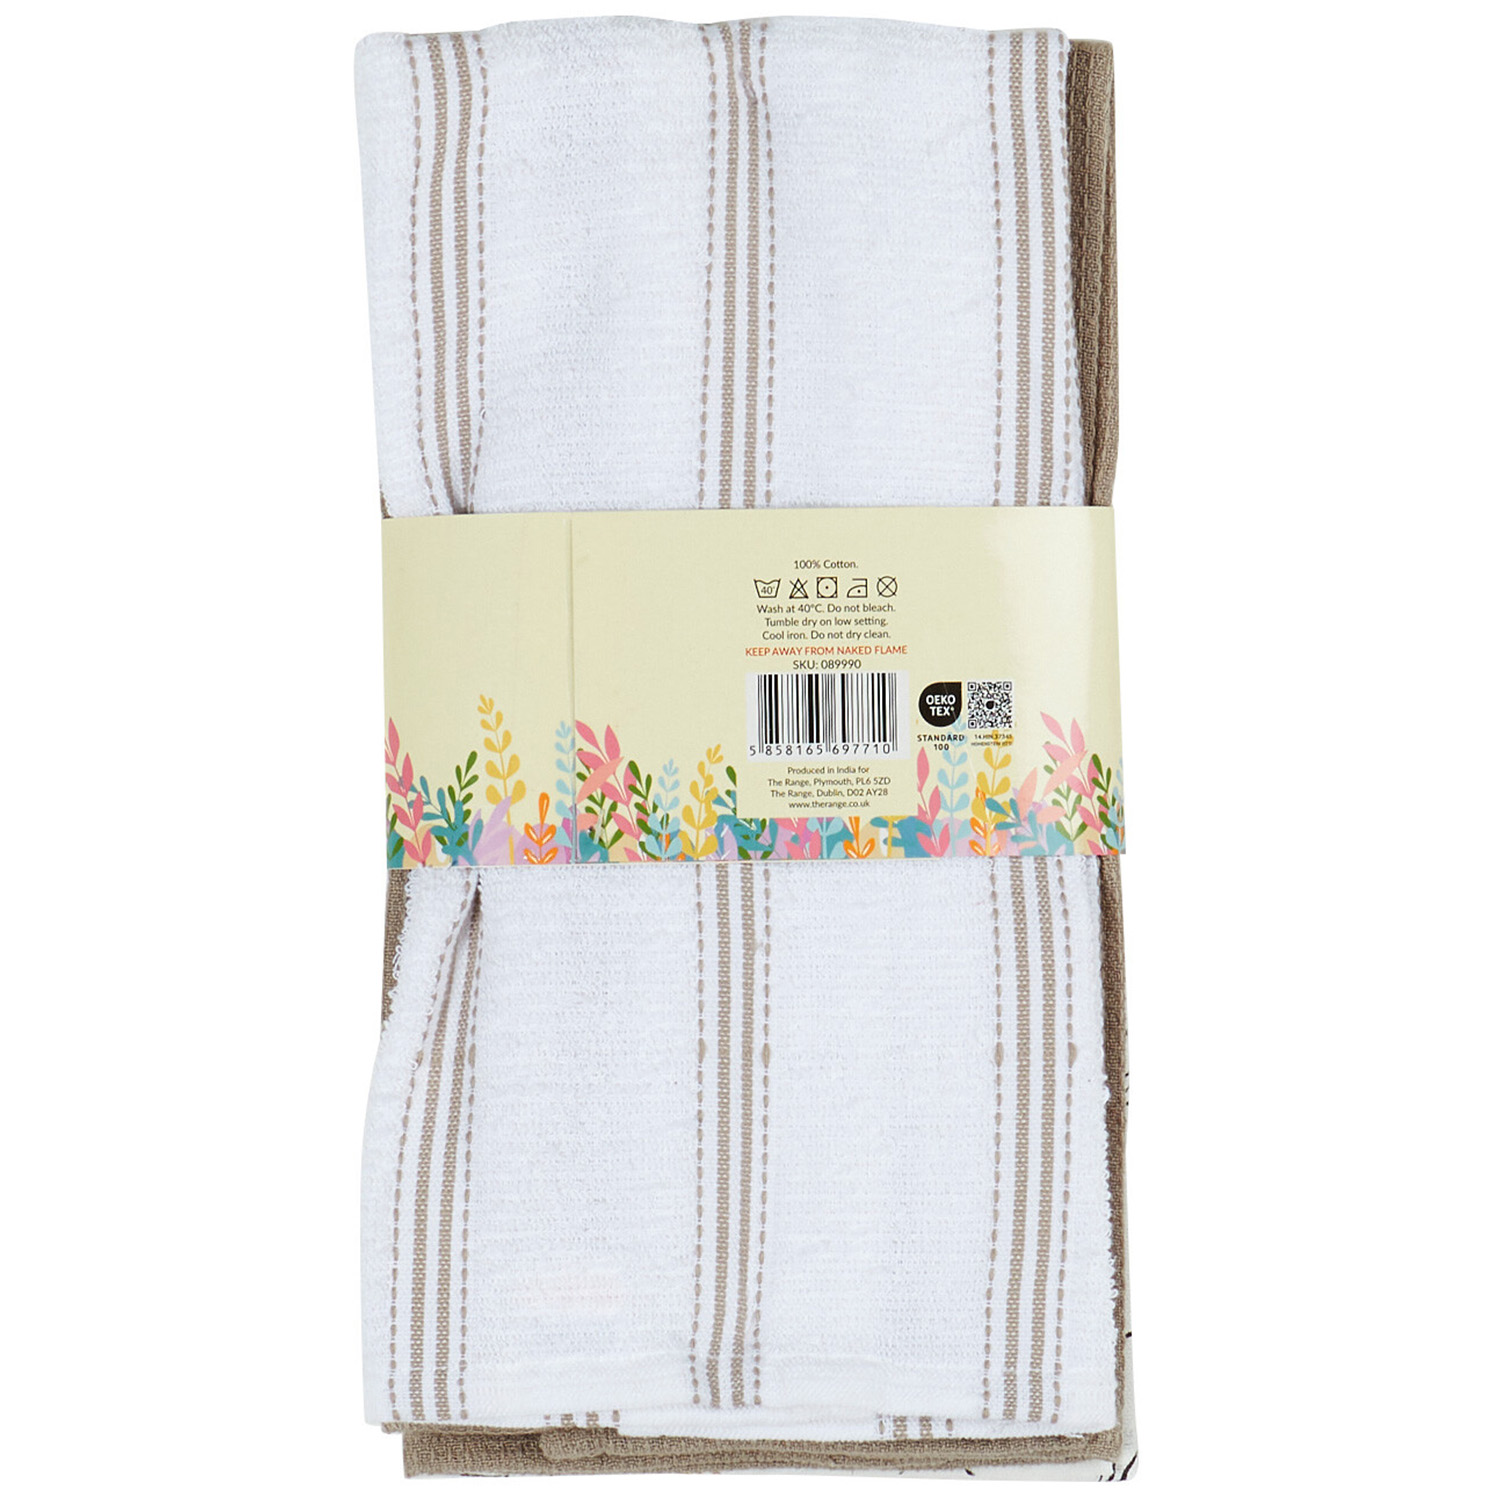 Pack of 3 Bunny Tea Towels - White Image 2